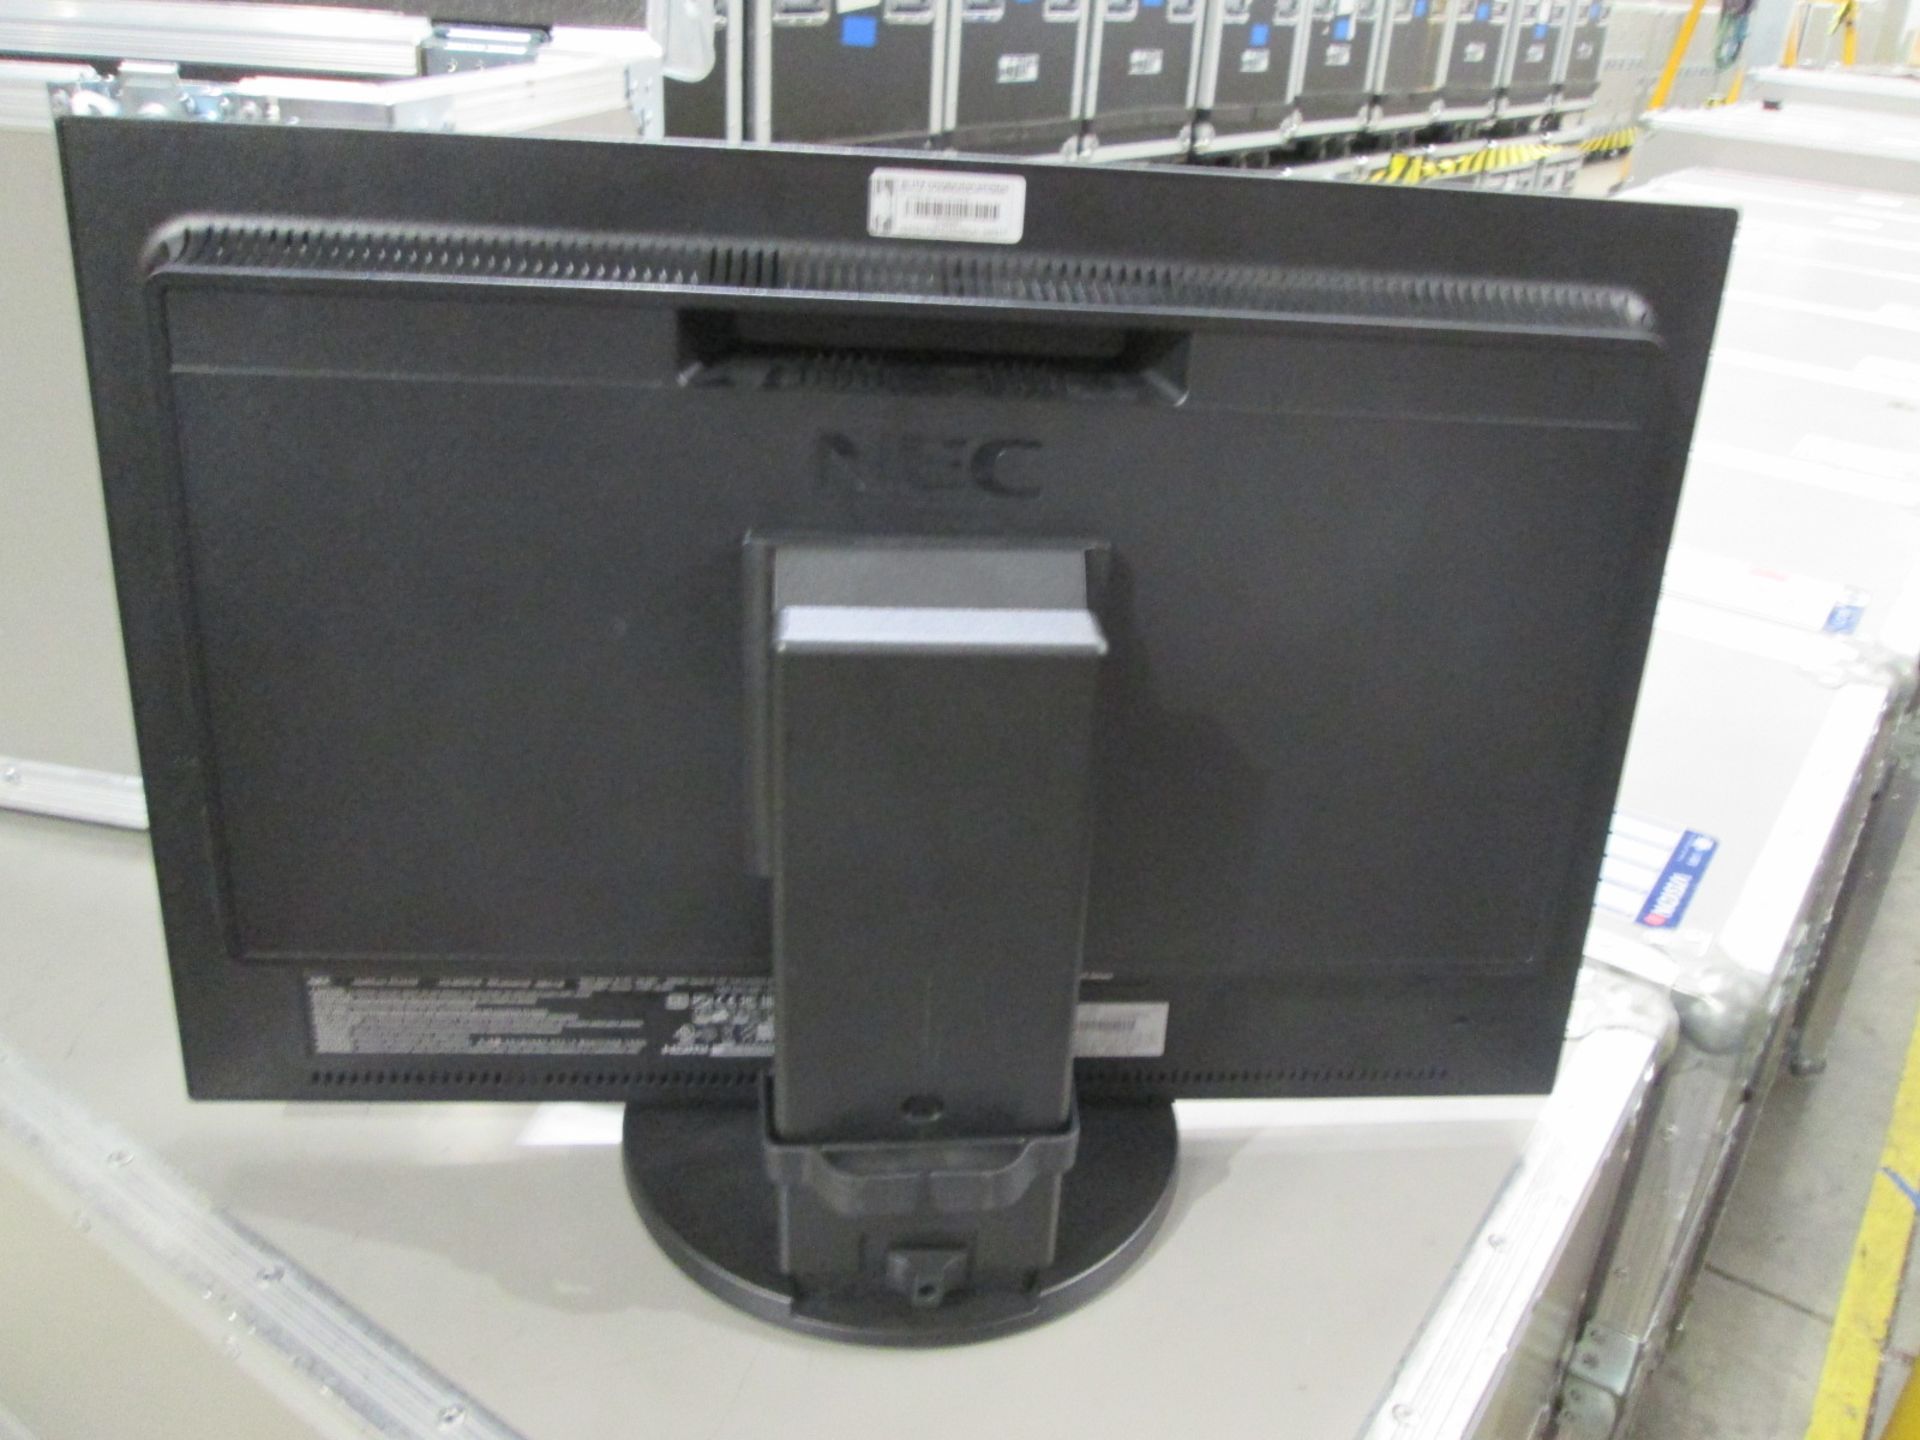 NEC PA243W 24" LCD Monitors (Qty 3) In flight cases - Image 2 of 5